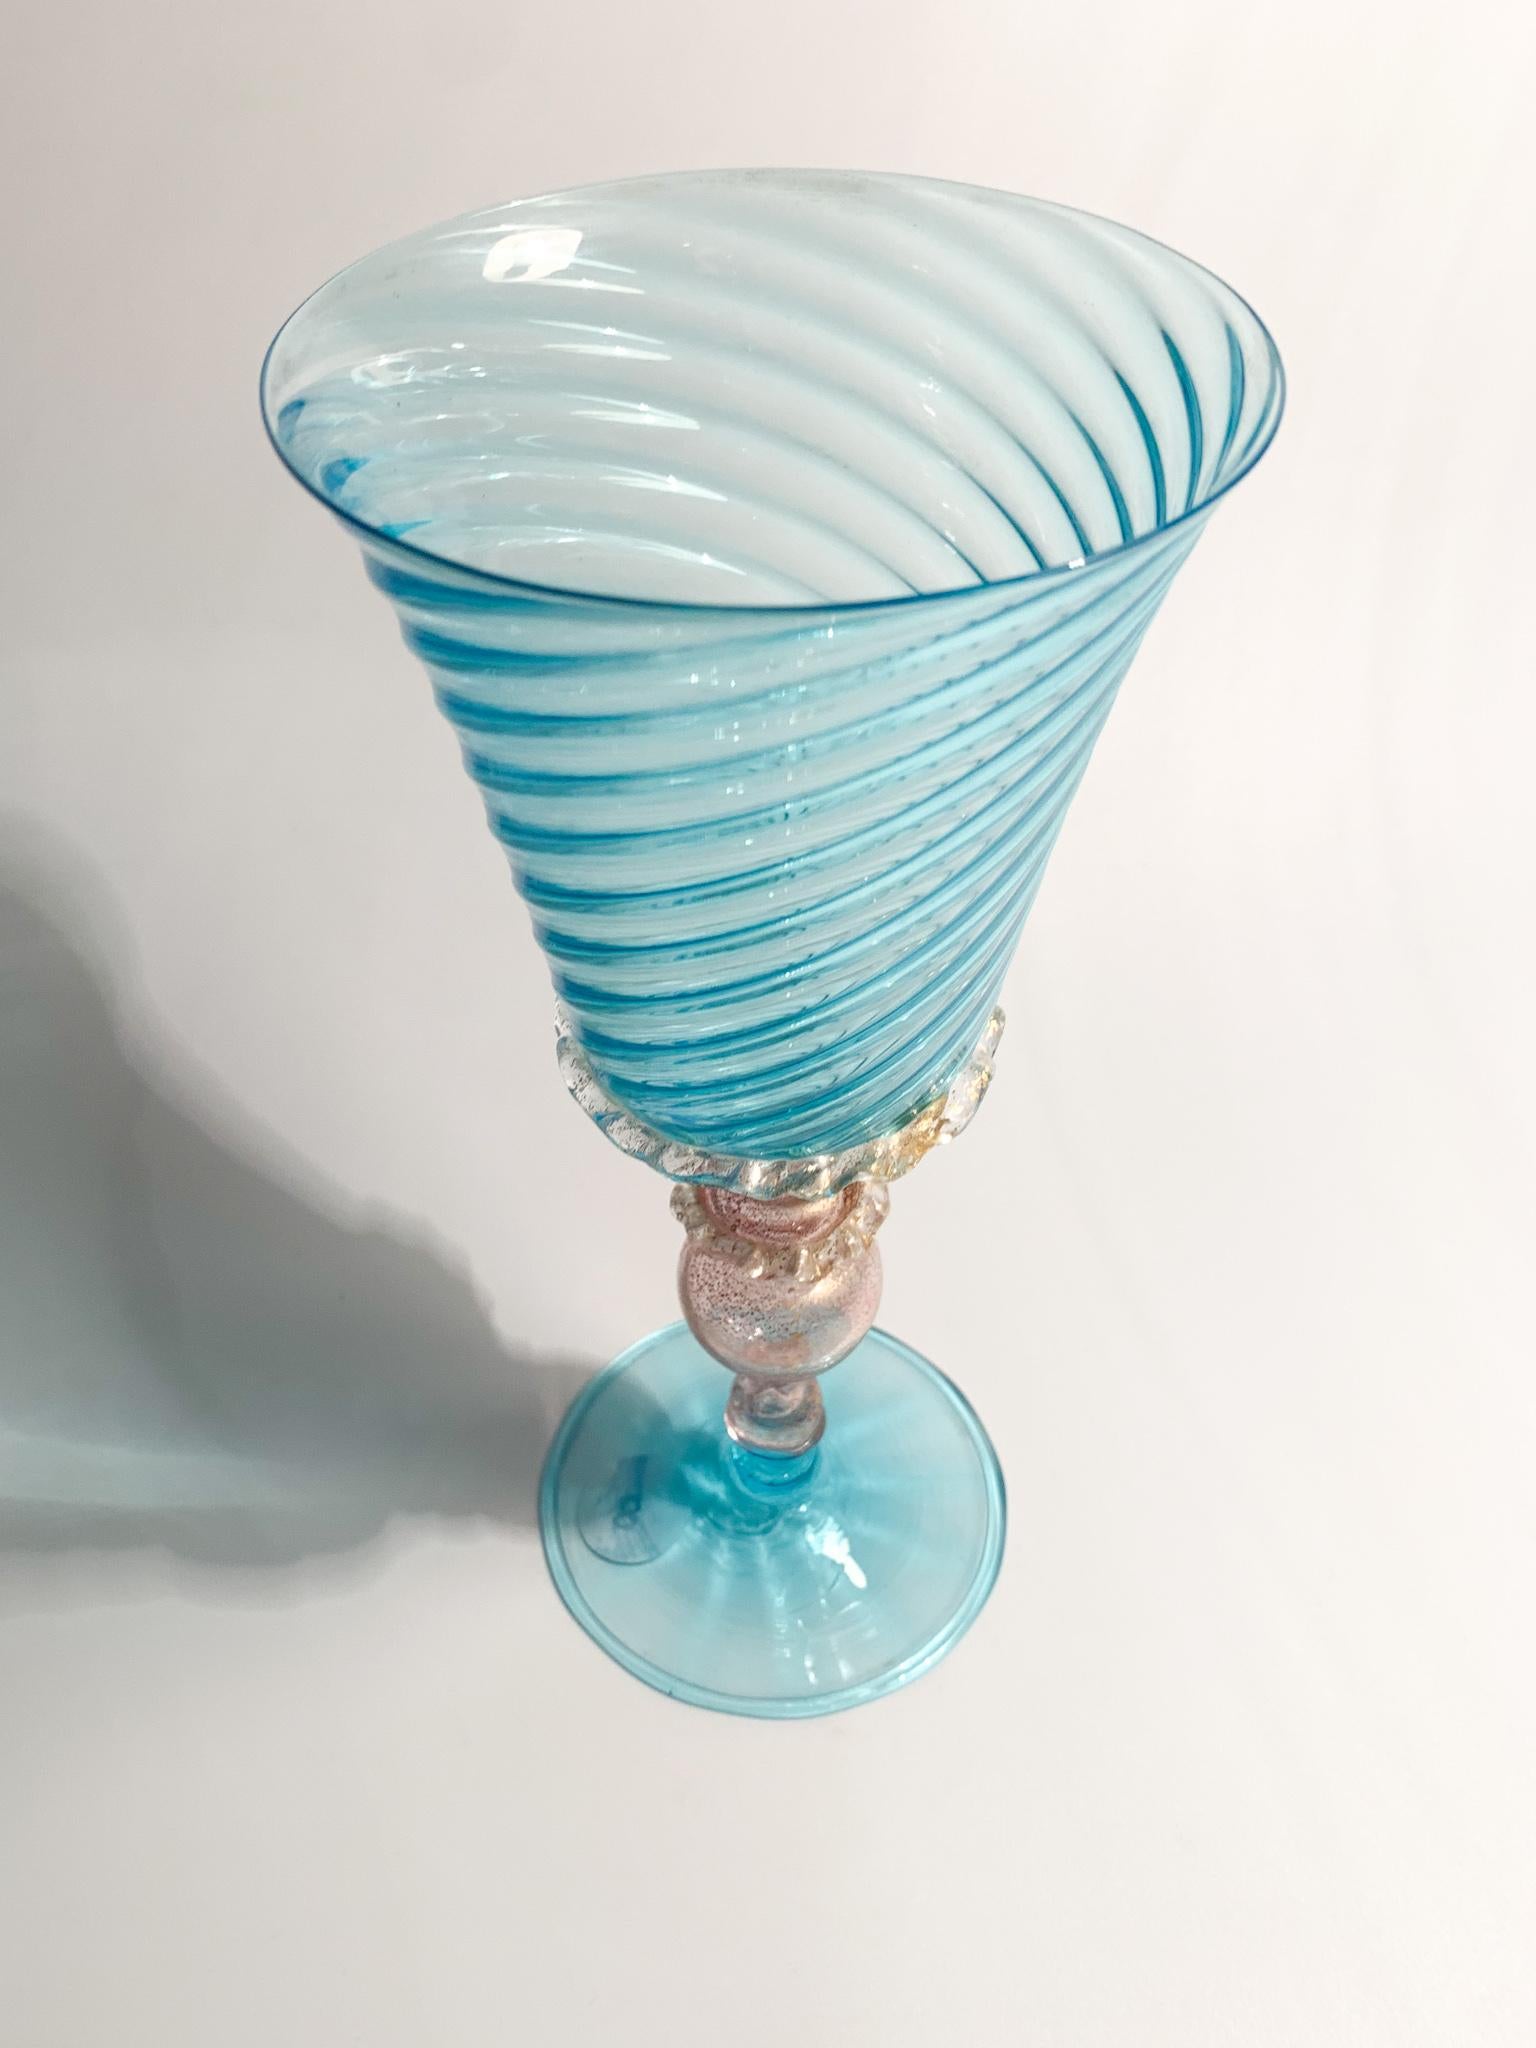 Mid-Century Modern Italian Glass in Light Blue and Pink Murano Glass from the 1950s